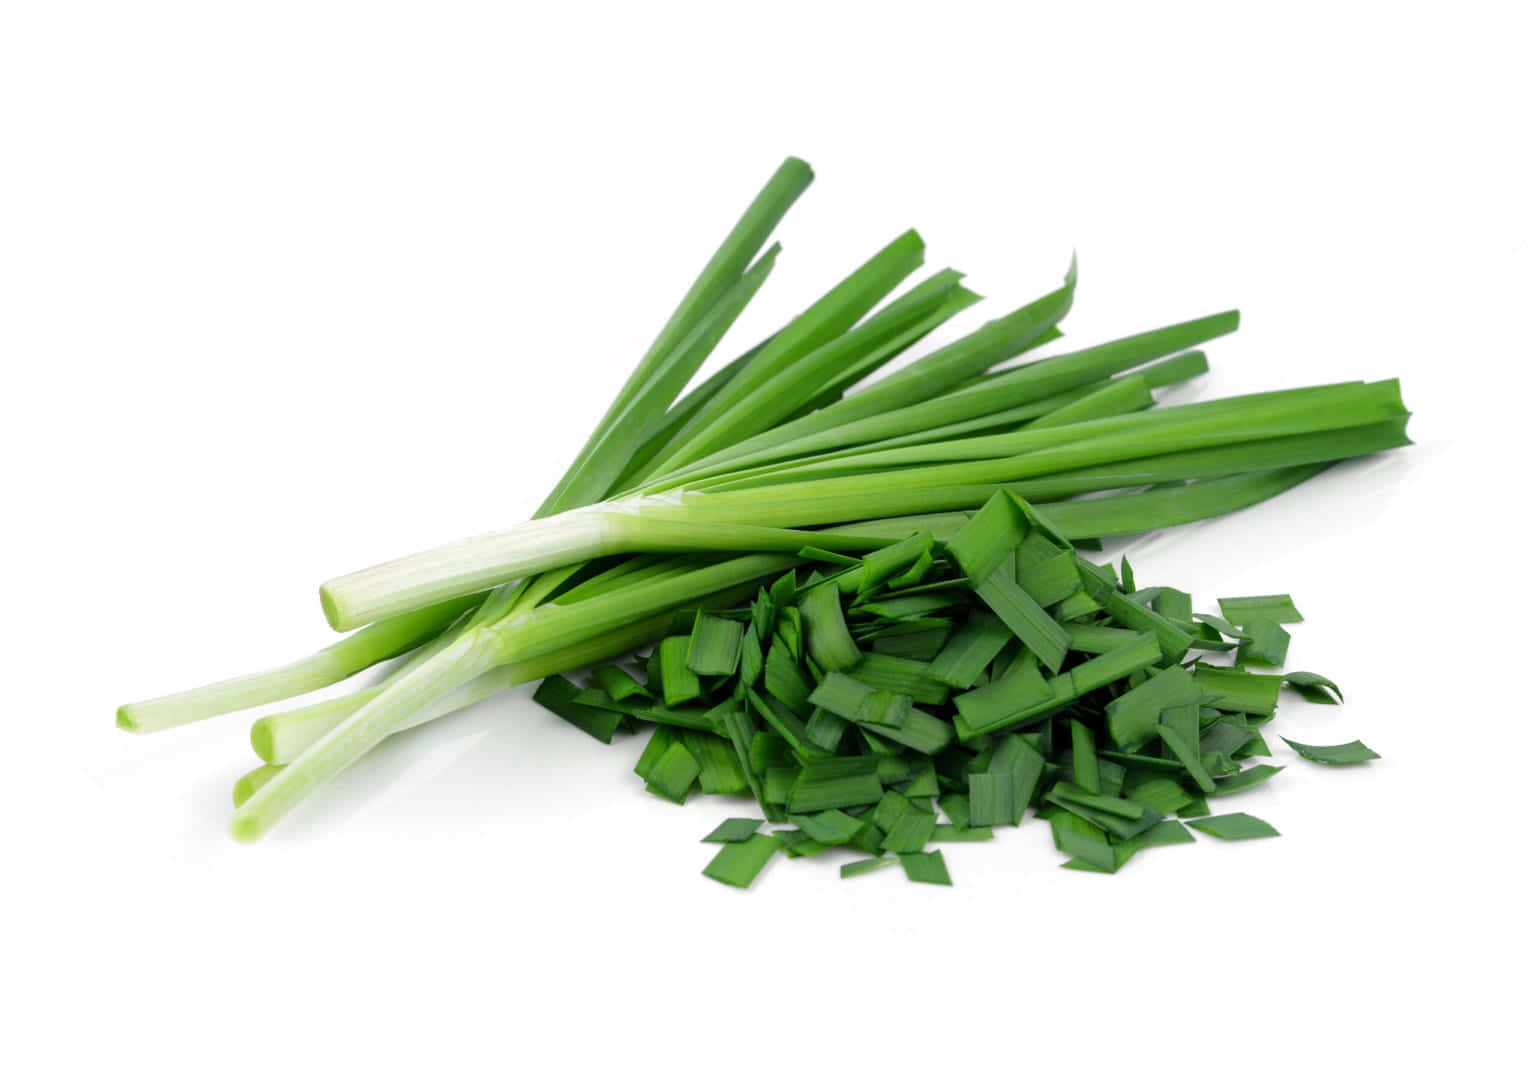 Small Cuts And Whole Green Chives Wallpaper